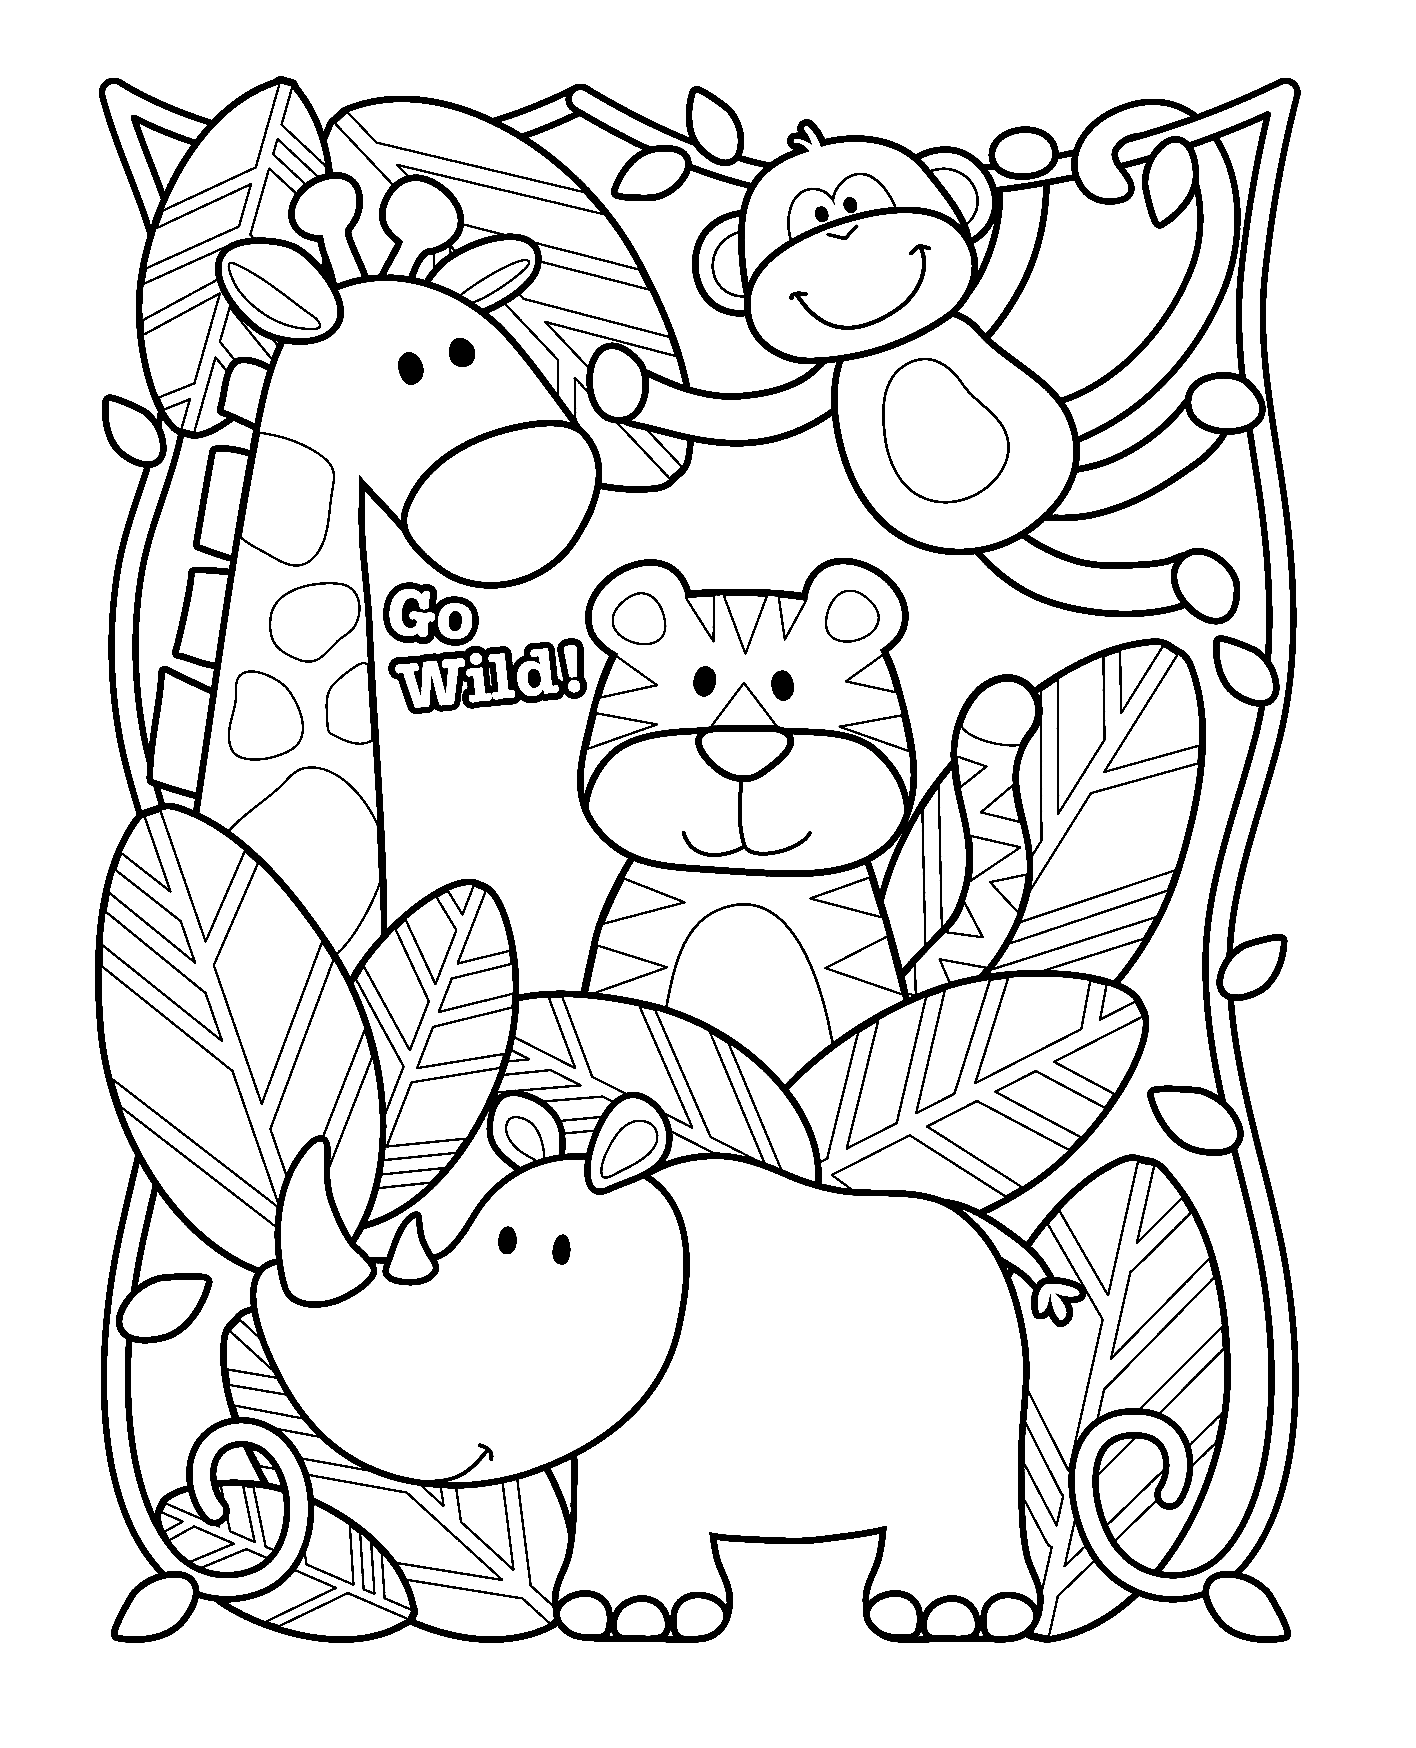 Zoo Coloring Pages: Bring The Zoo To Your Children'S House! Coloring